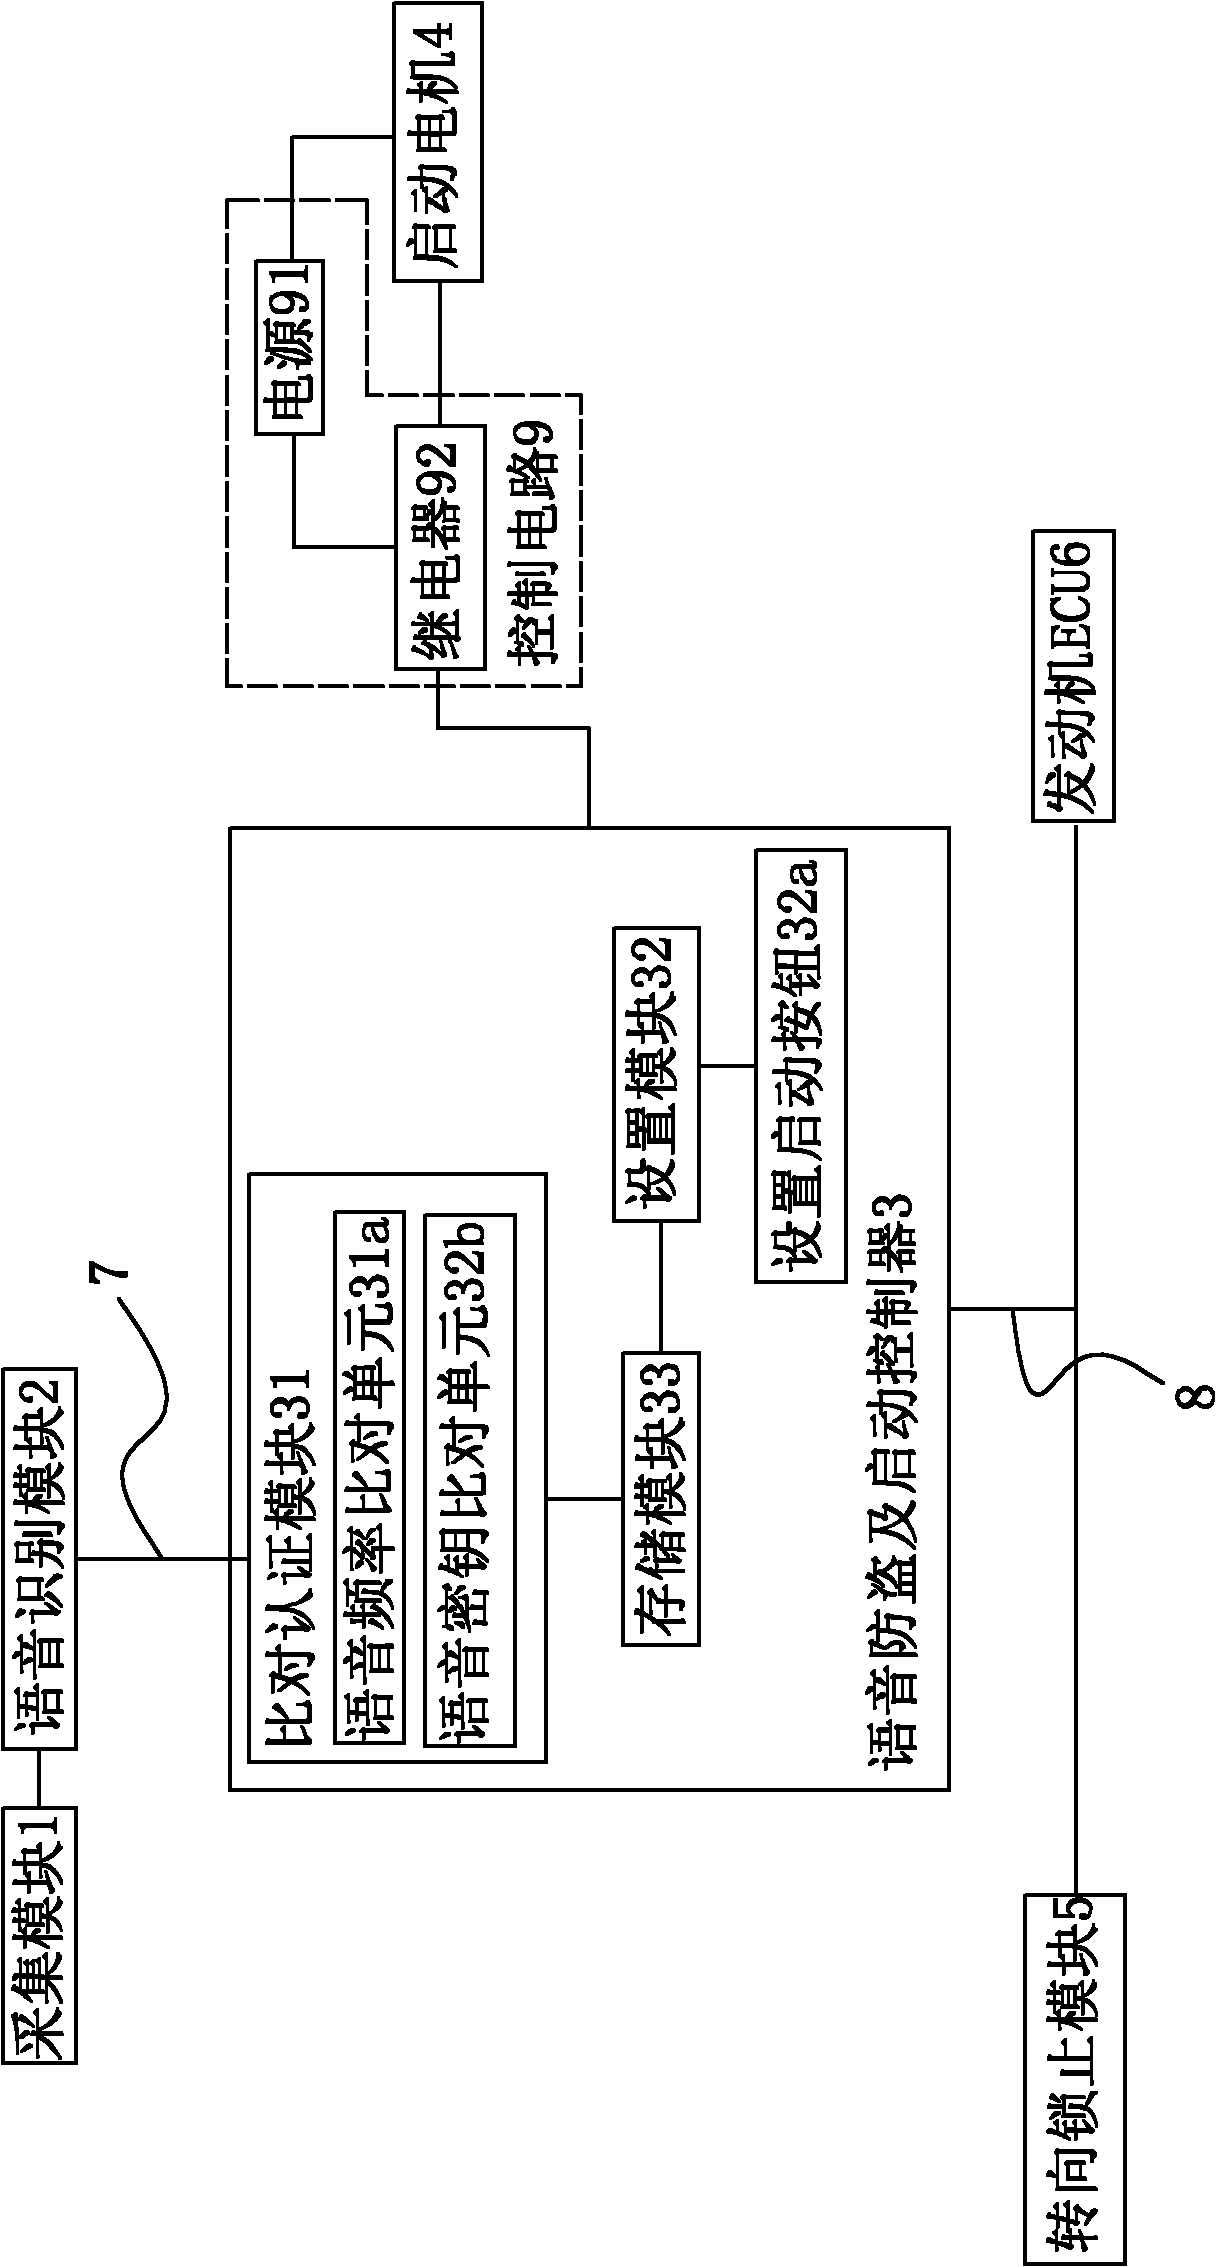 Voice anti-theft and startup control system for vehicles